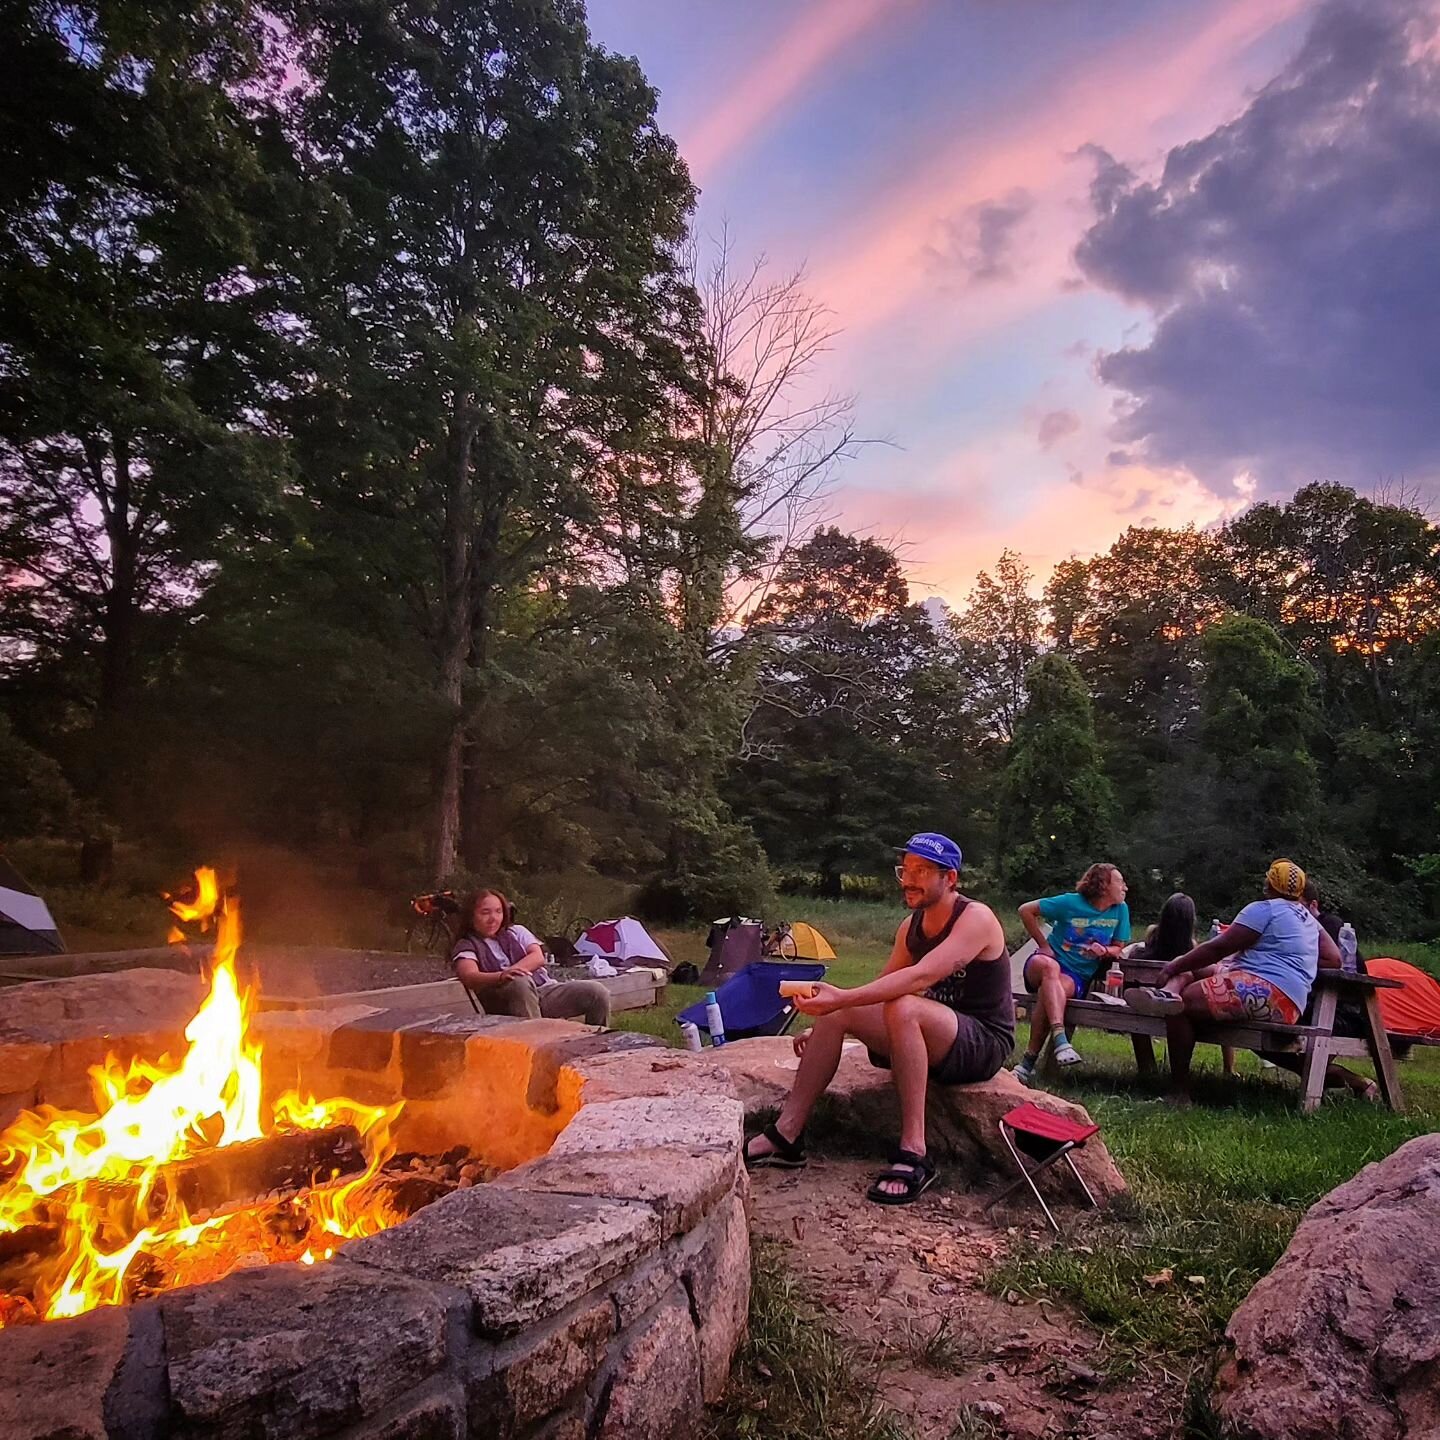 We'll  be heading up to Ward Pound Ridge on Memorial Day Weekend for Micro-Tour 4.

(Check Discord Server for &quot;Shadow Group&quot;)

#718microtour #bikecamping
#bikepacking #campfire
#nycsadventurebikeshop #bikeadventure